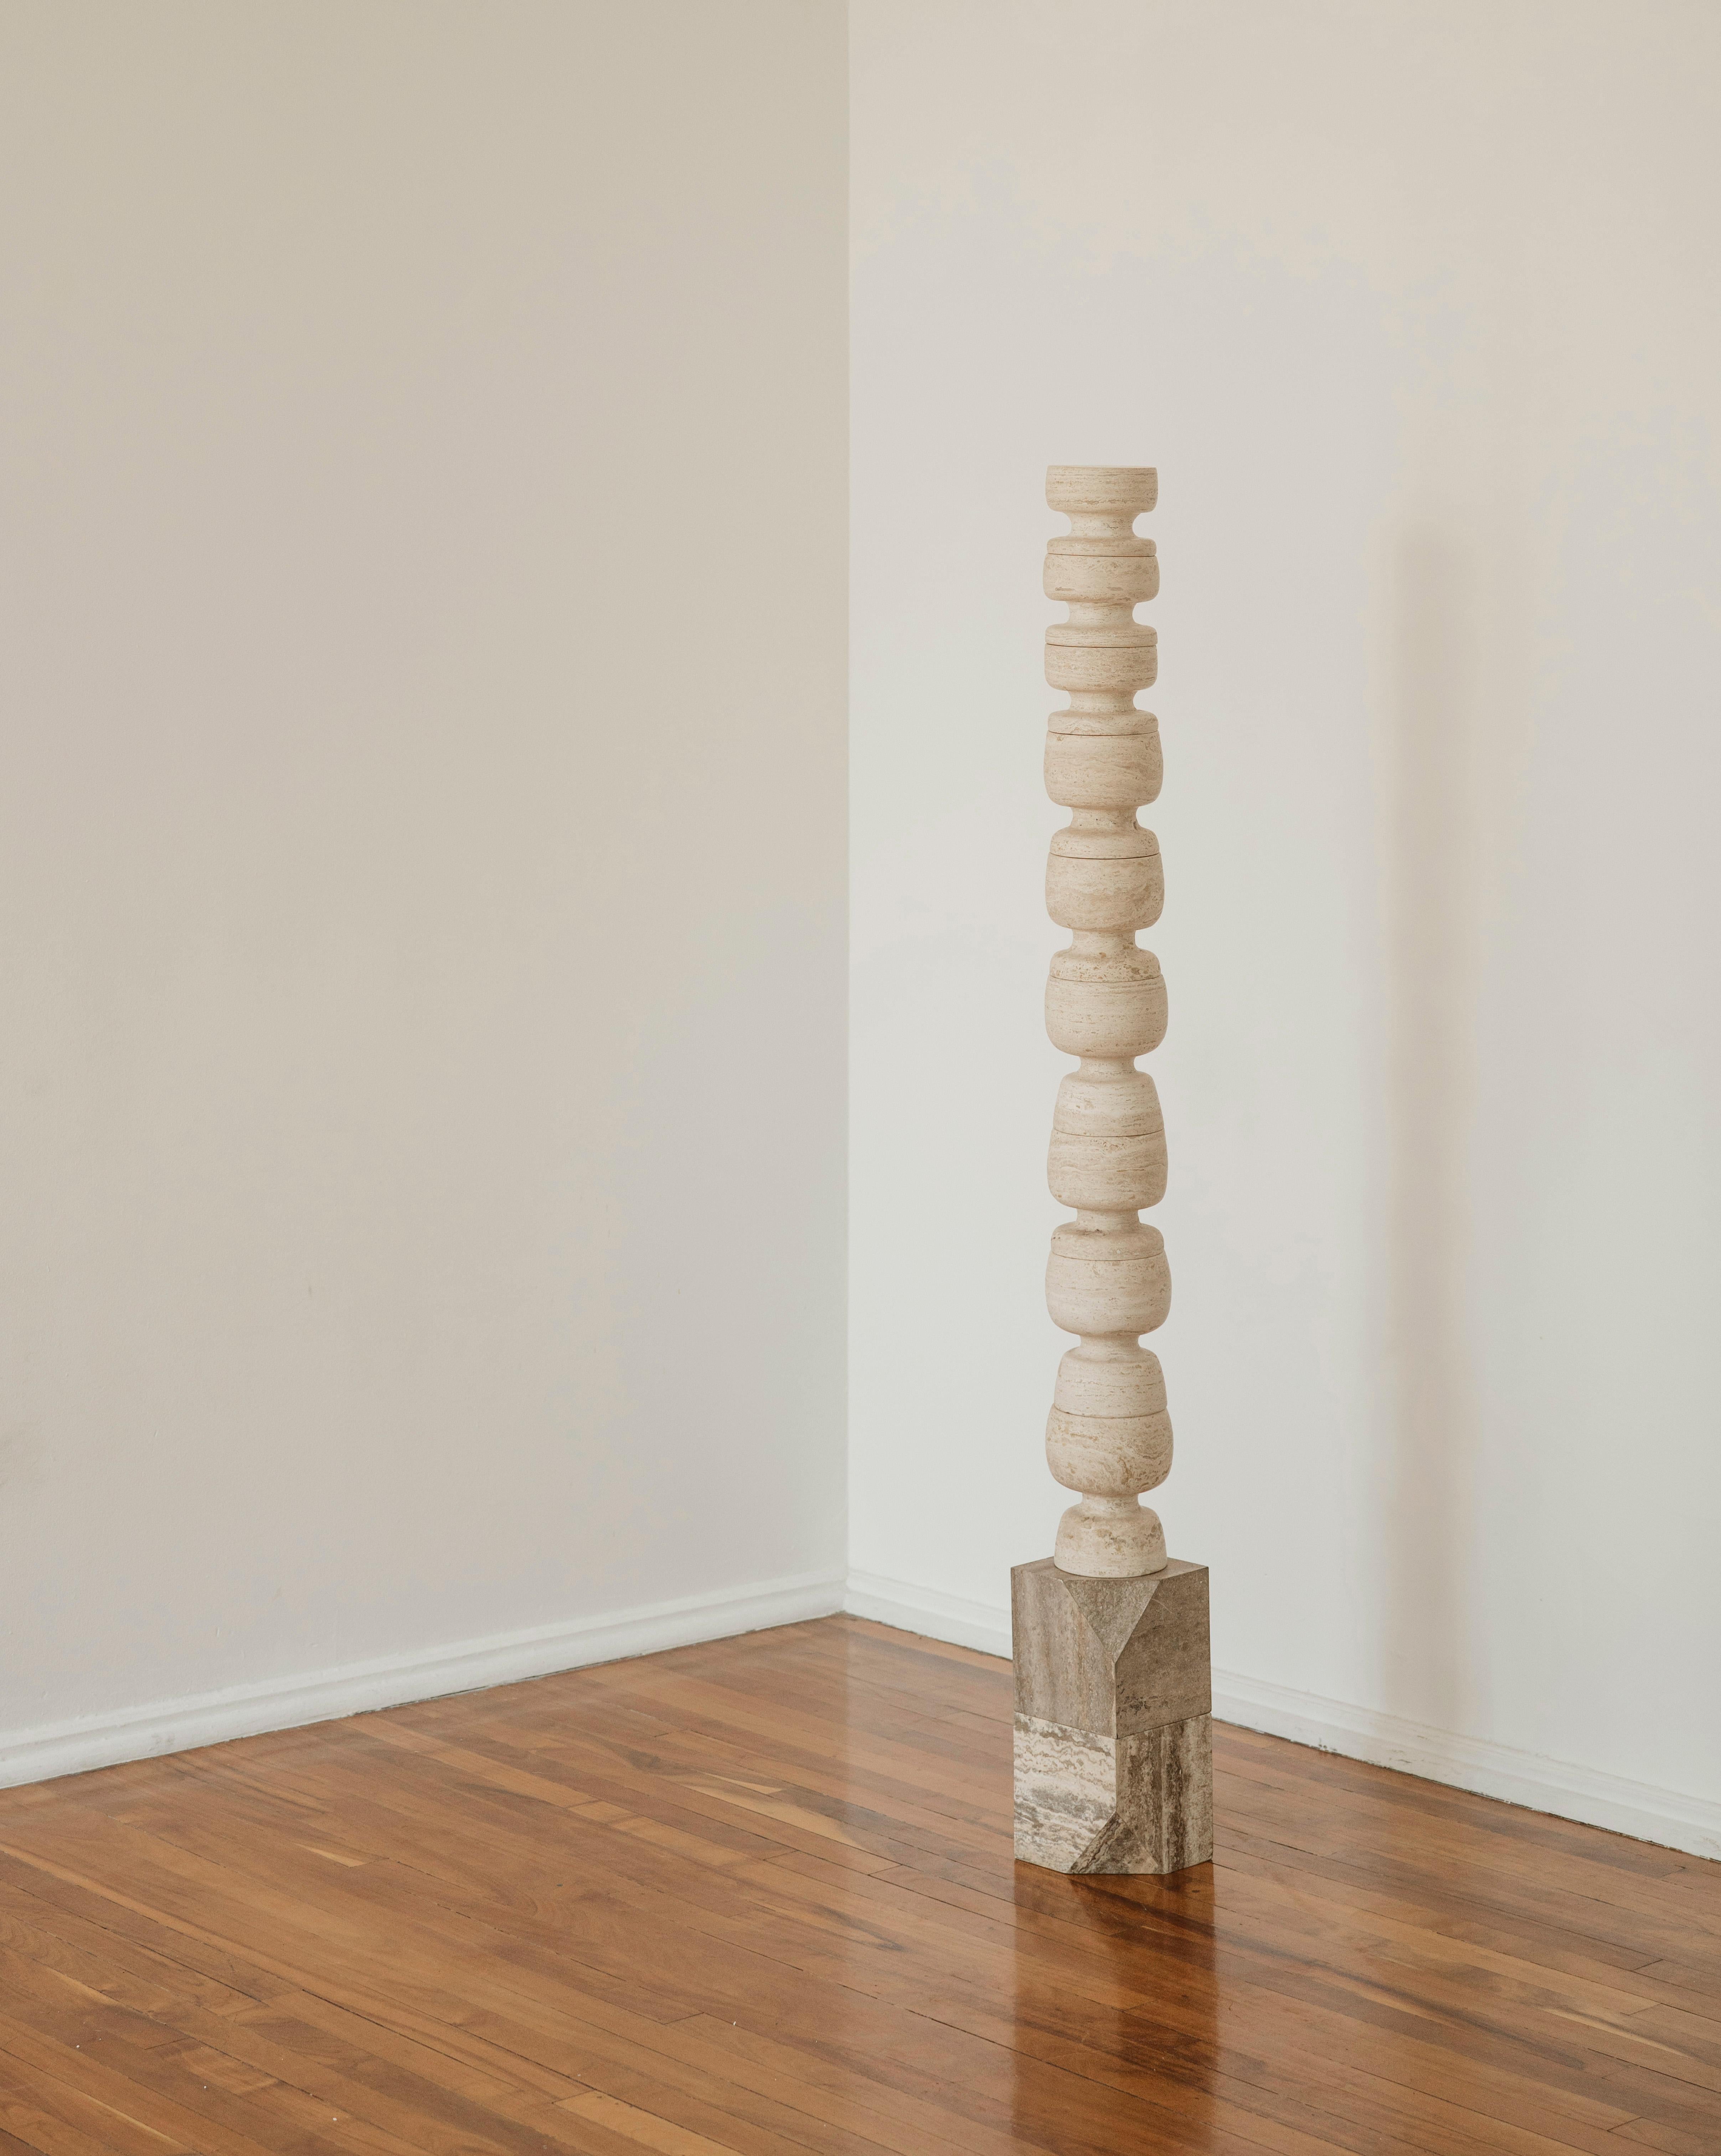 I. About Rebeca Cors
Rebeca Cors (México, 1988). 
Her work oscillates between sculpture and utility object, studying the limits and meeting points between these two concepts. The intention of her work is to question paradigms in order to